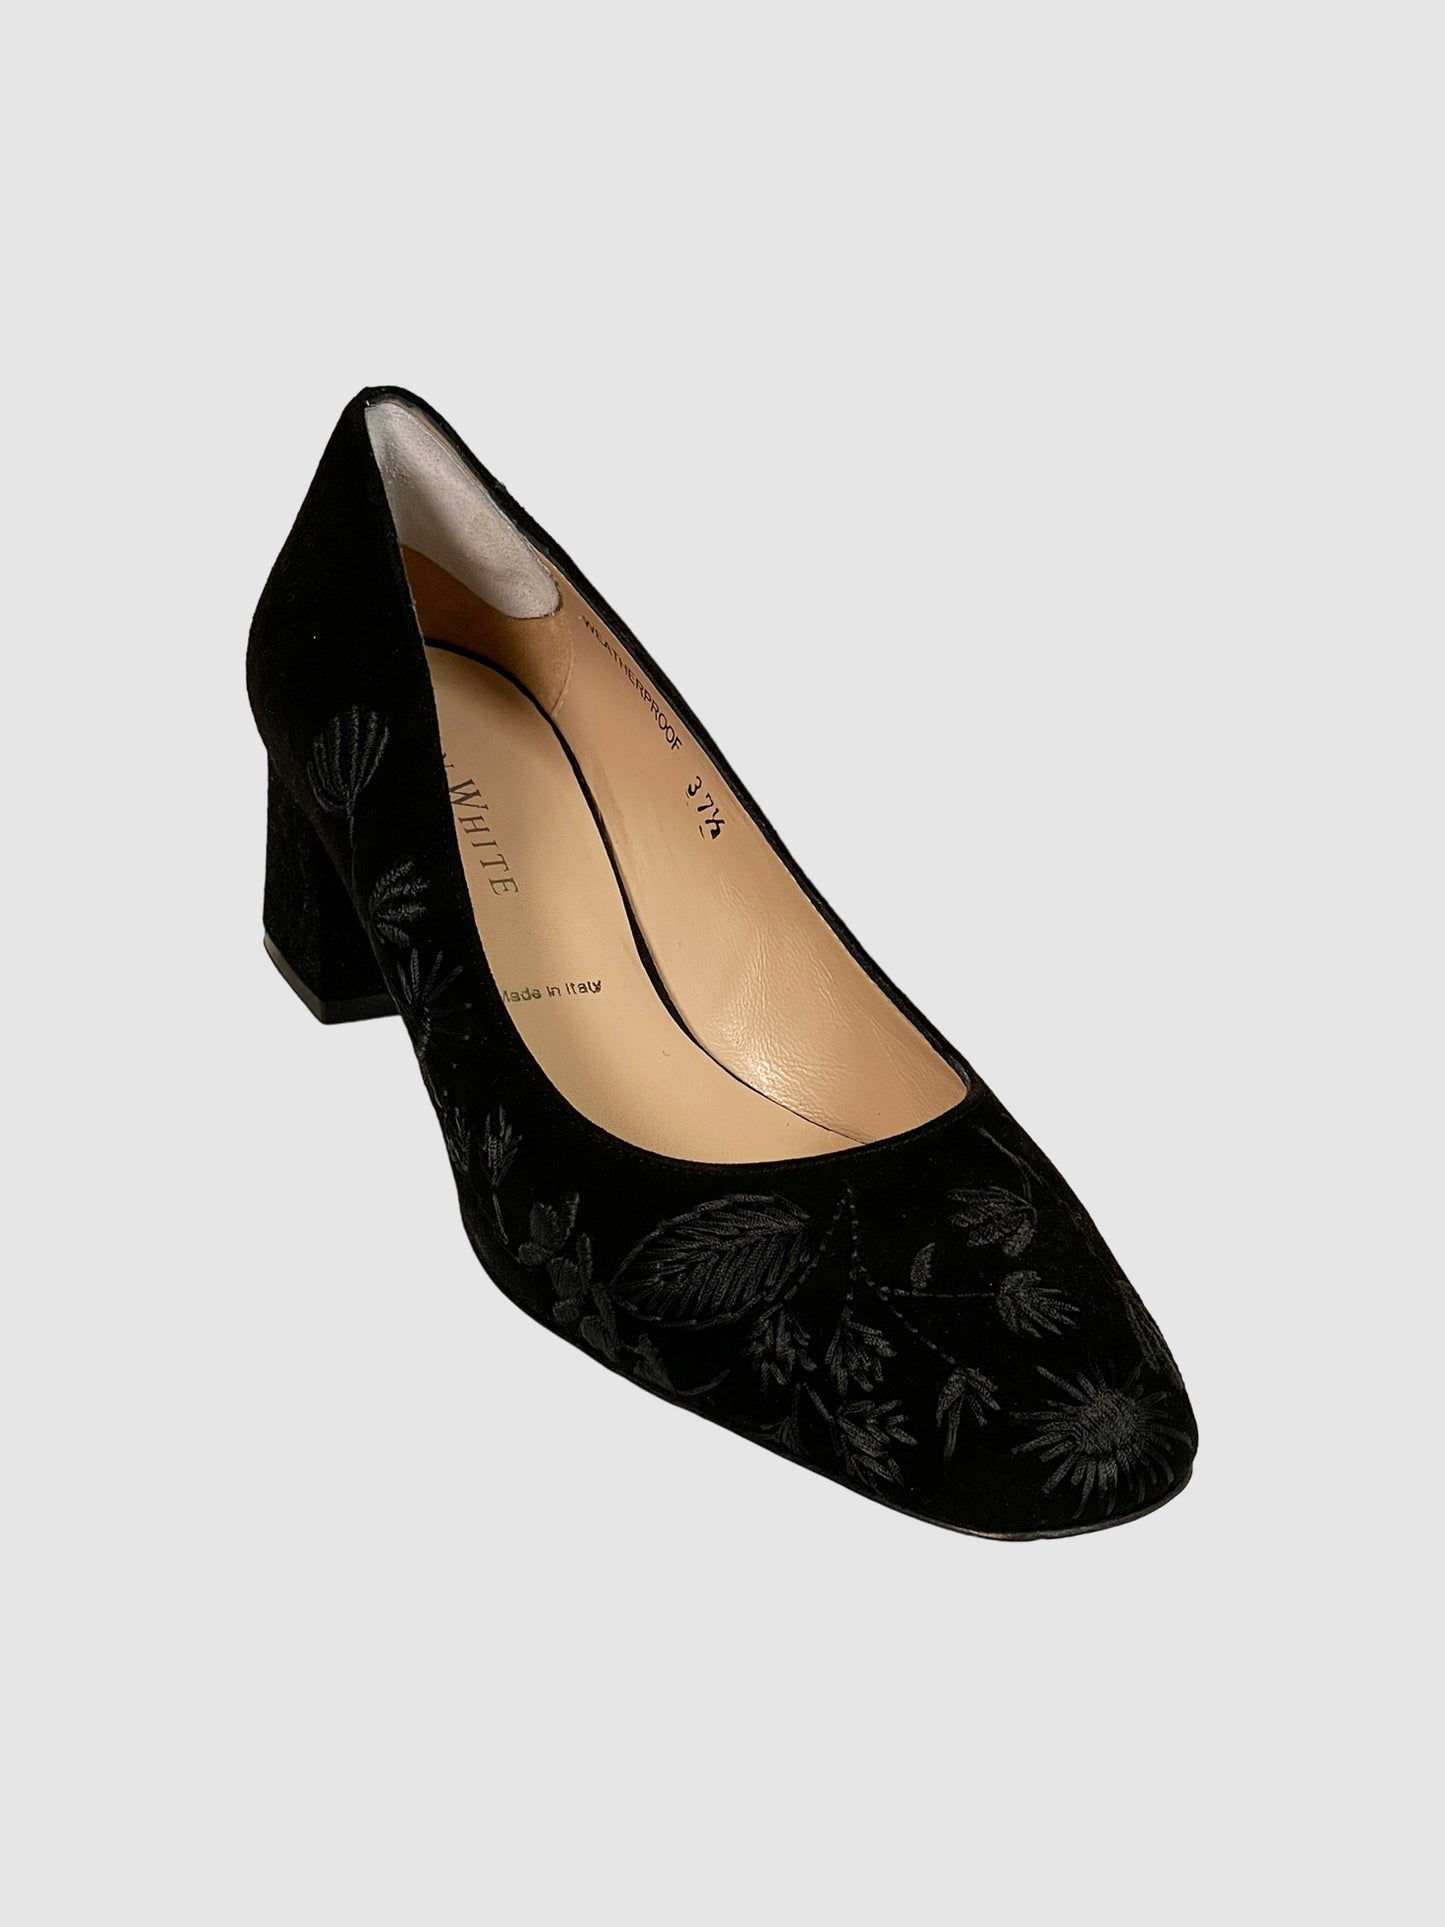 Ron White Suede Embroidered Pumps - Size 37.5